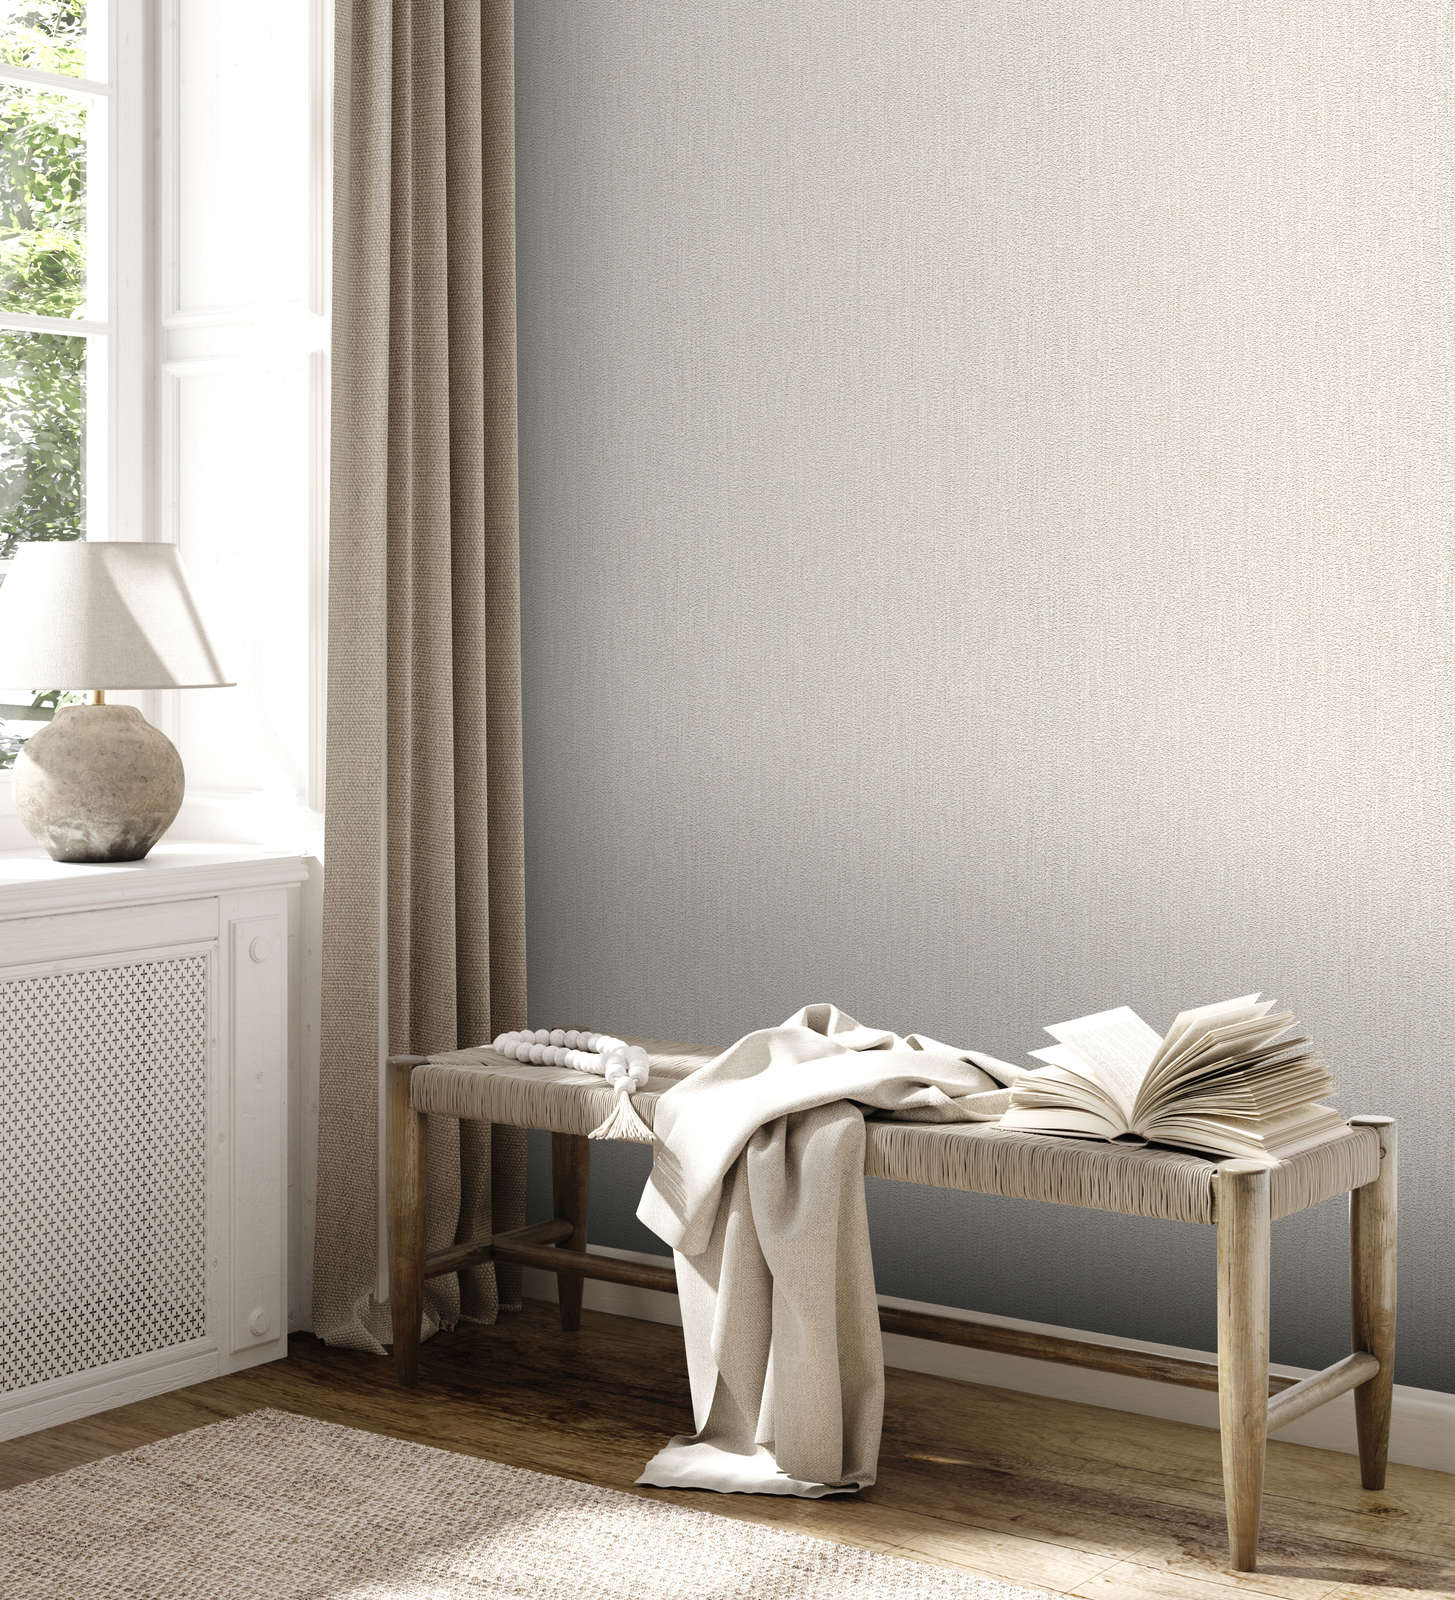             Non-woven wallpaper with fabric structure in light glossy - white, cream
        